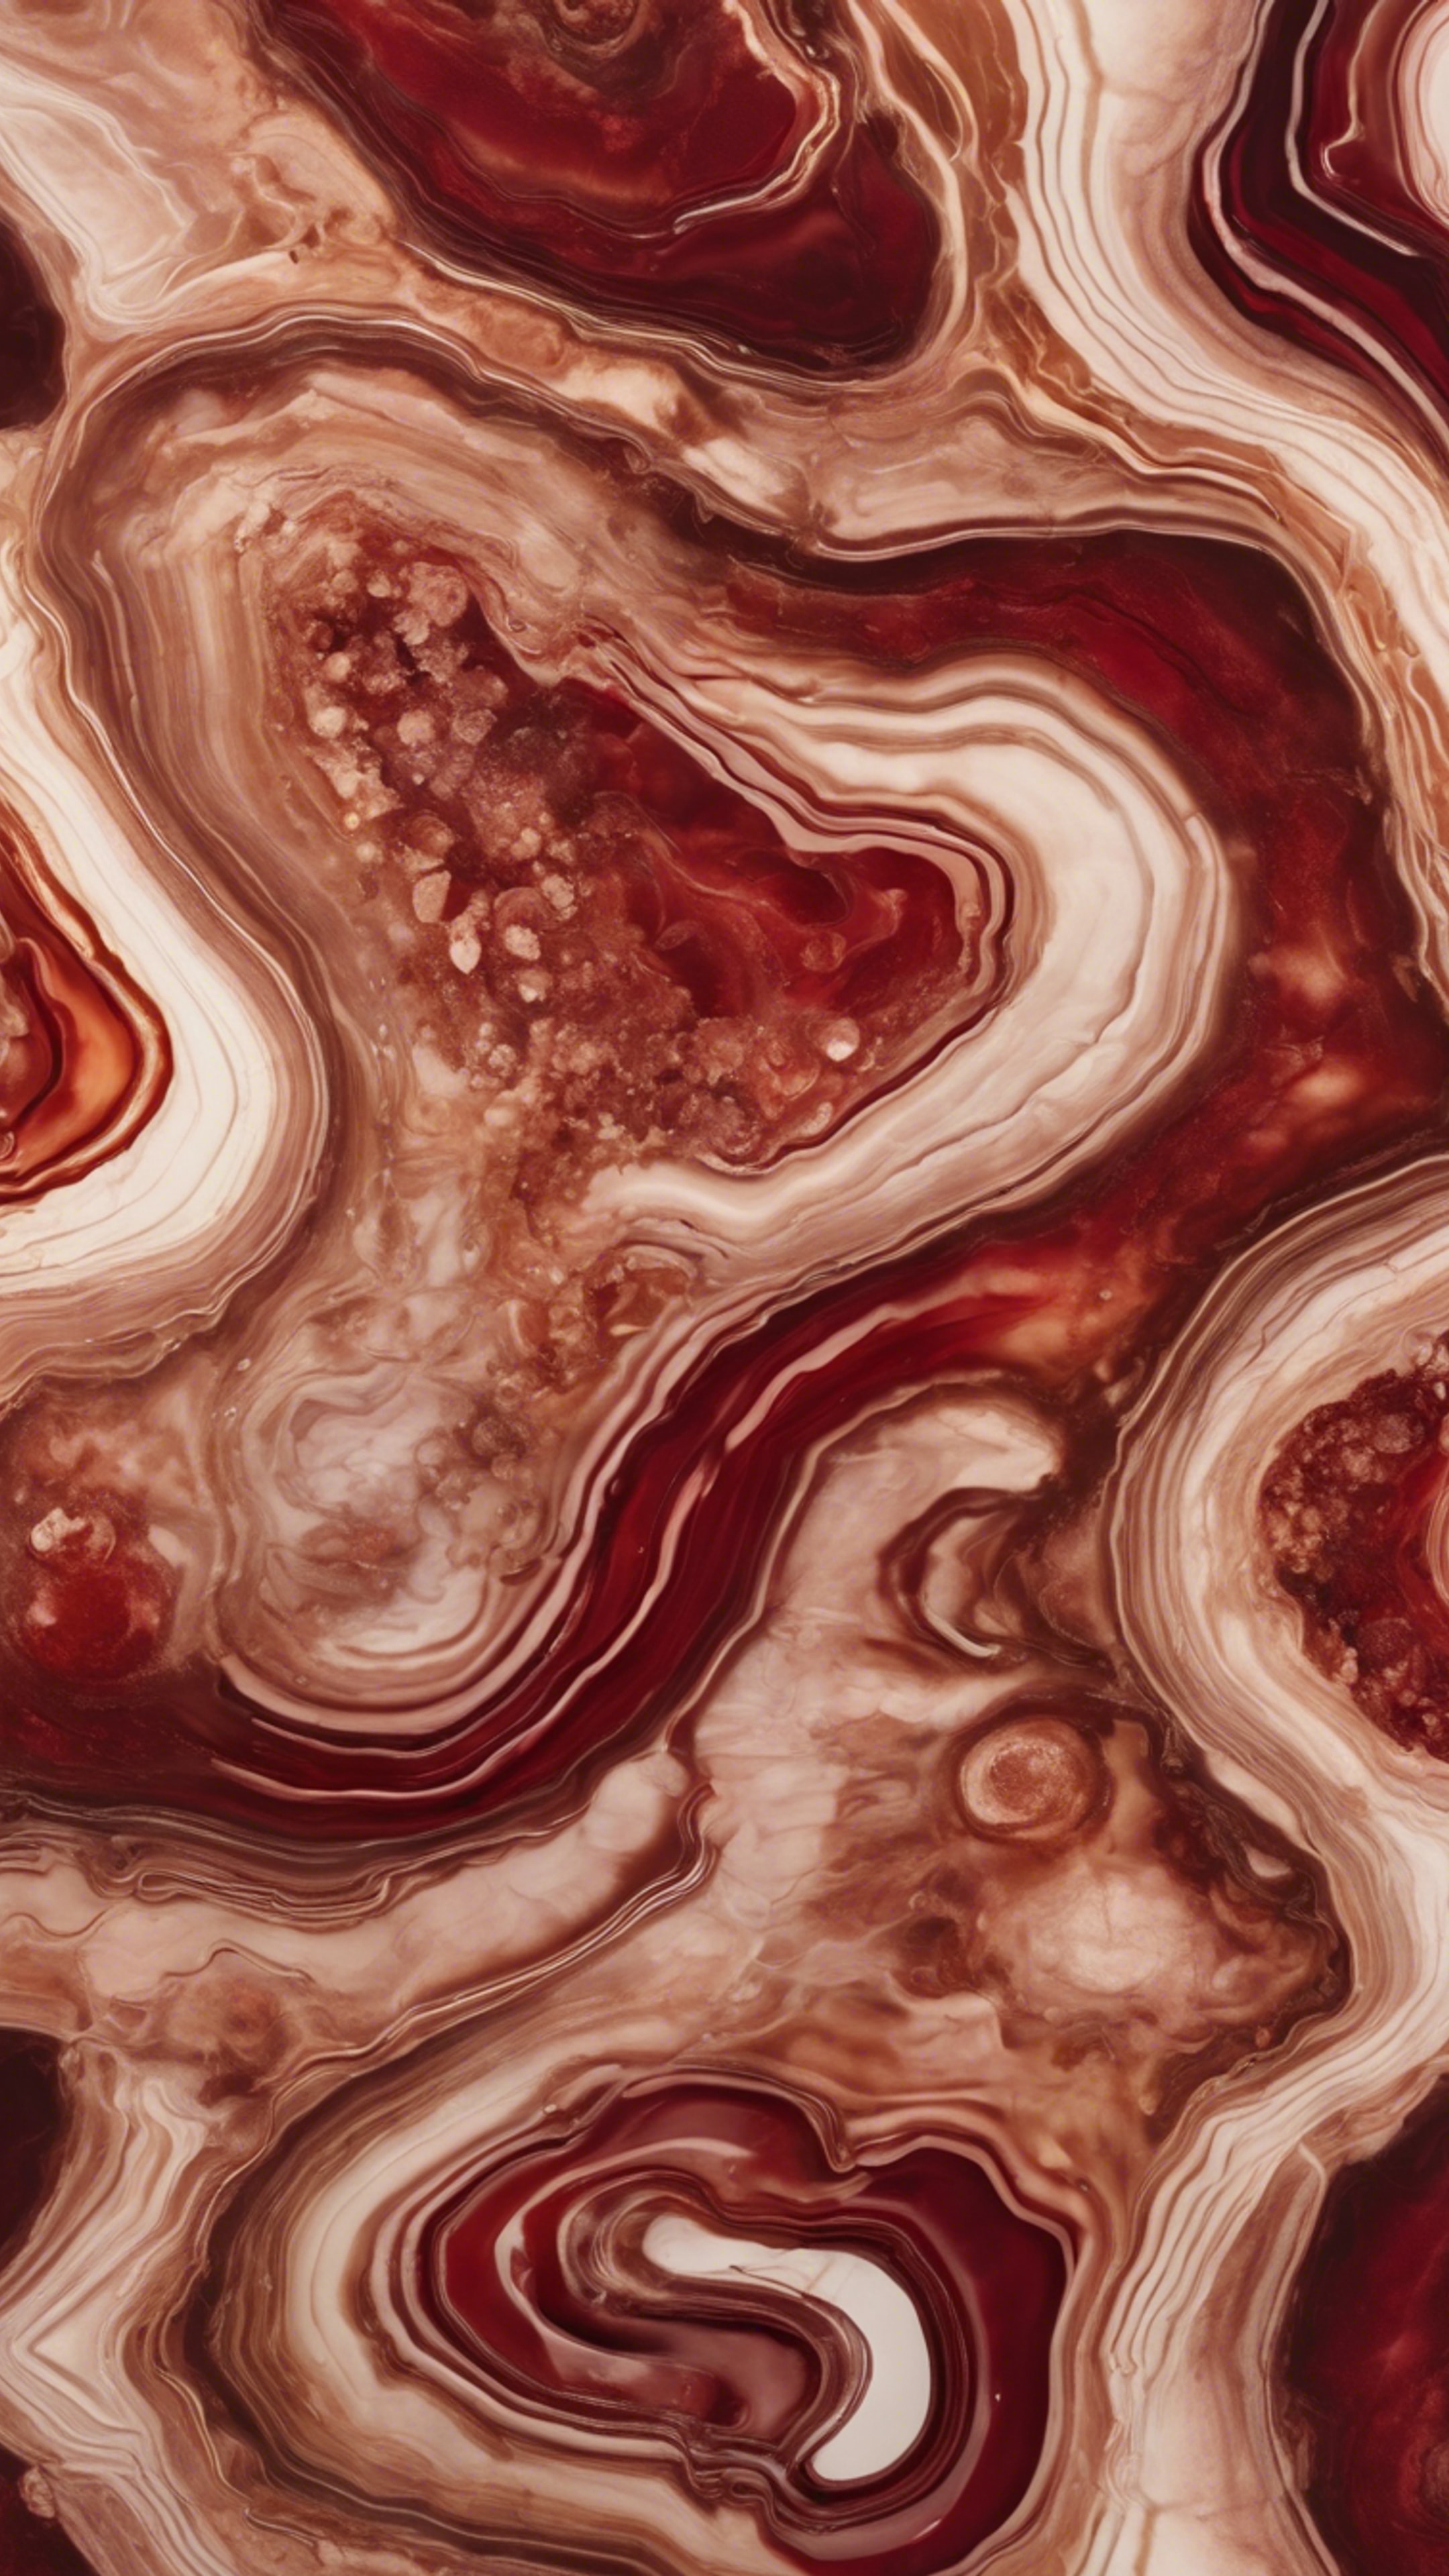 Grungy agate swirls in garnet red and sepia tones, forming a fascinating, abstract pattern. ورق الجدران[bb48f1c473e4473bbd4a]